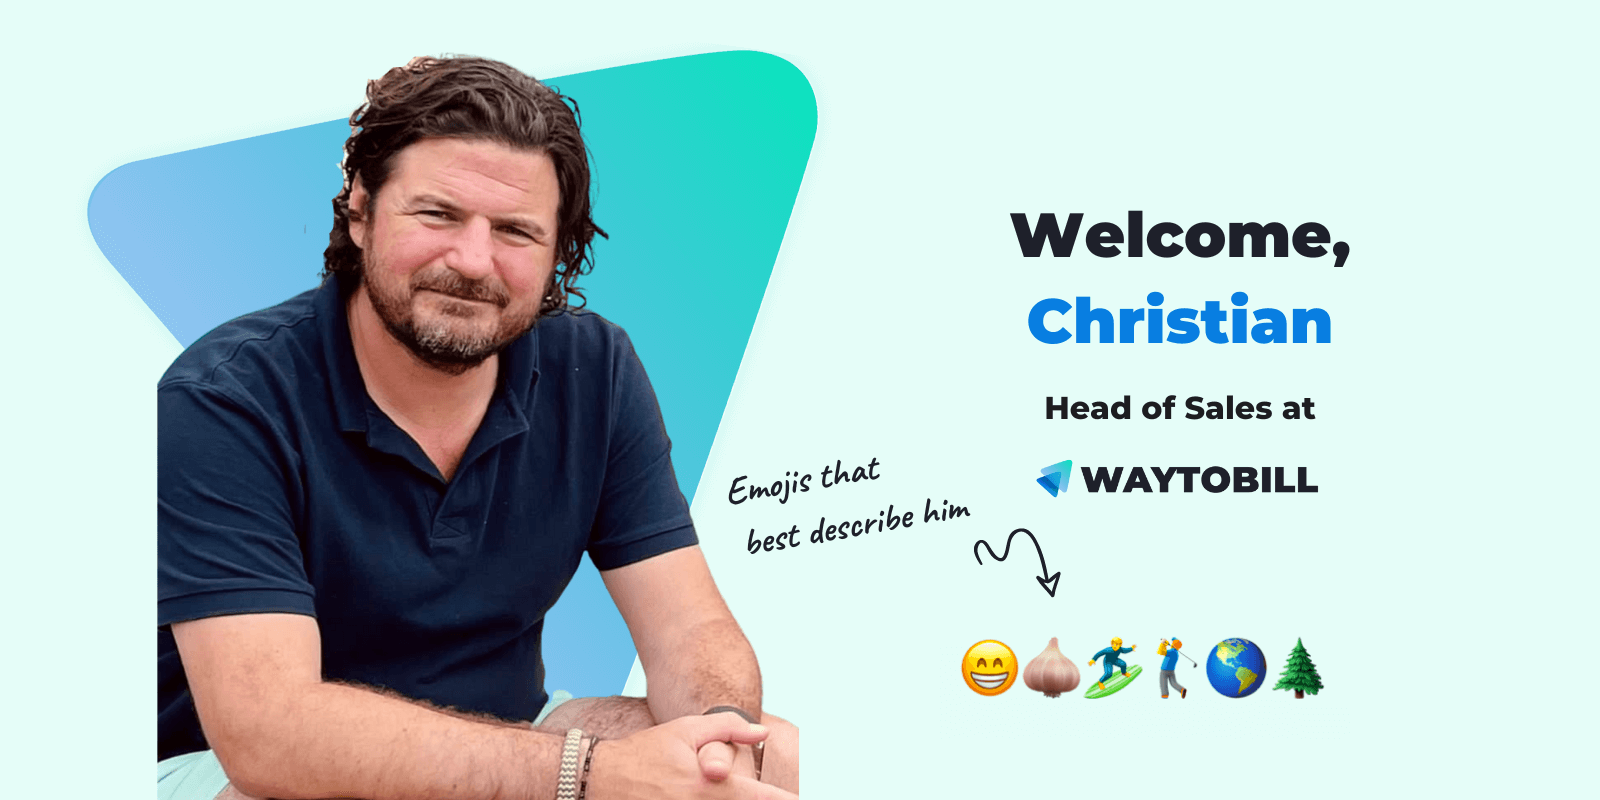 Meet the Waytobill Team: Welcome Christian, Our New Head of Sales